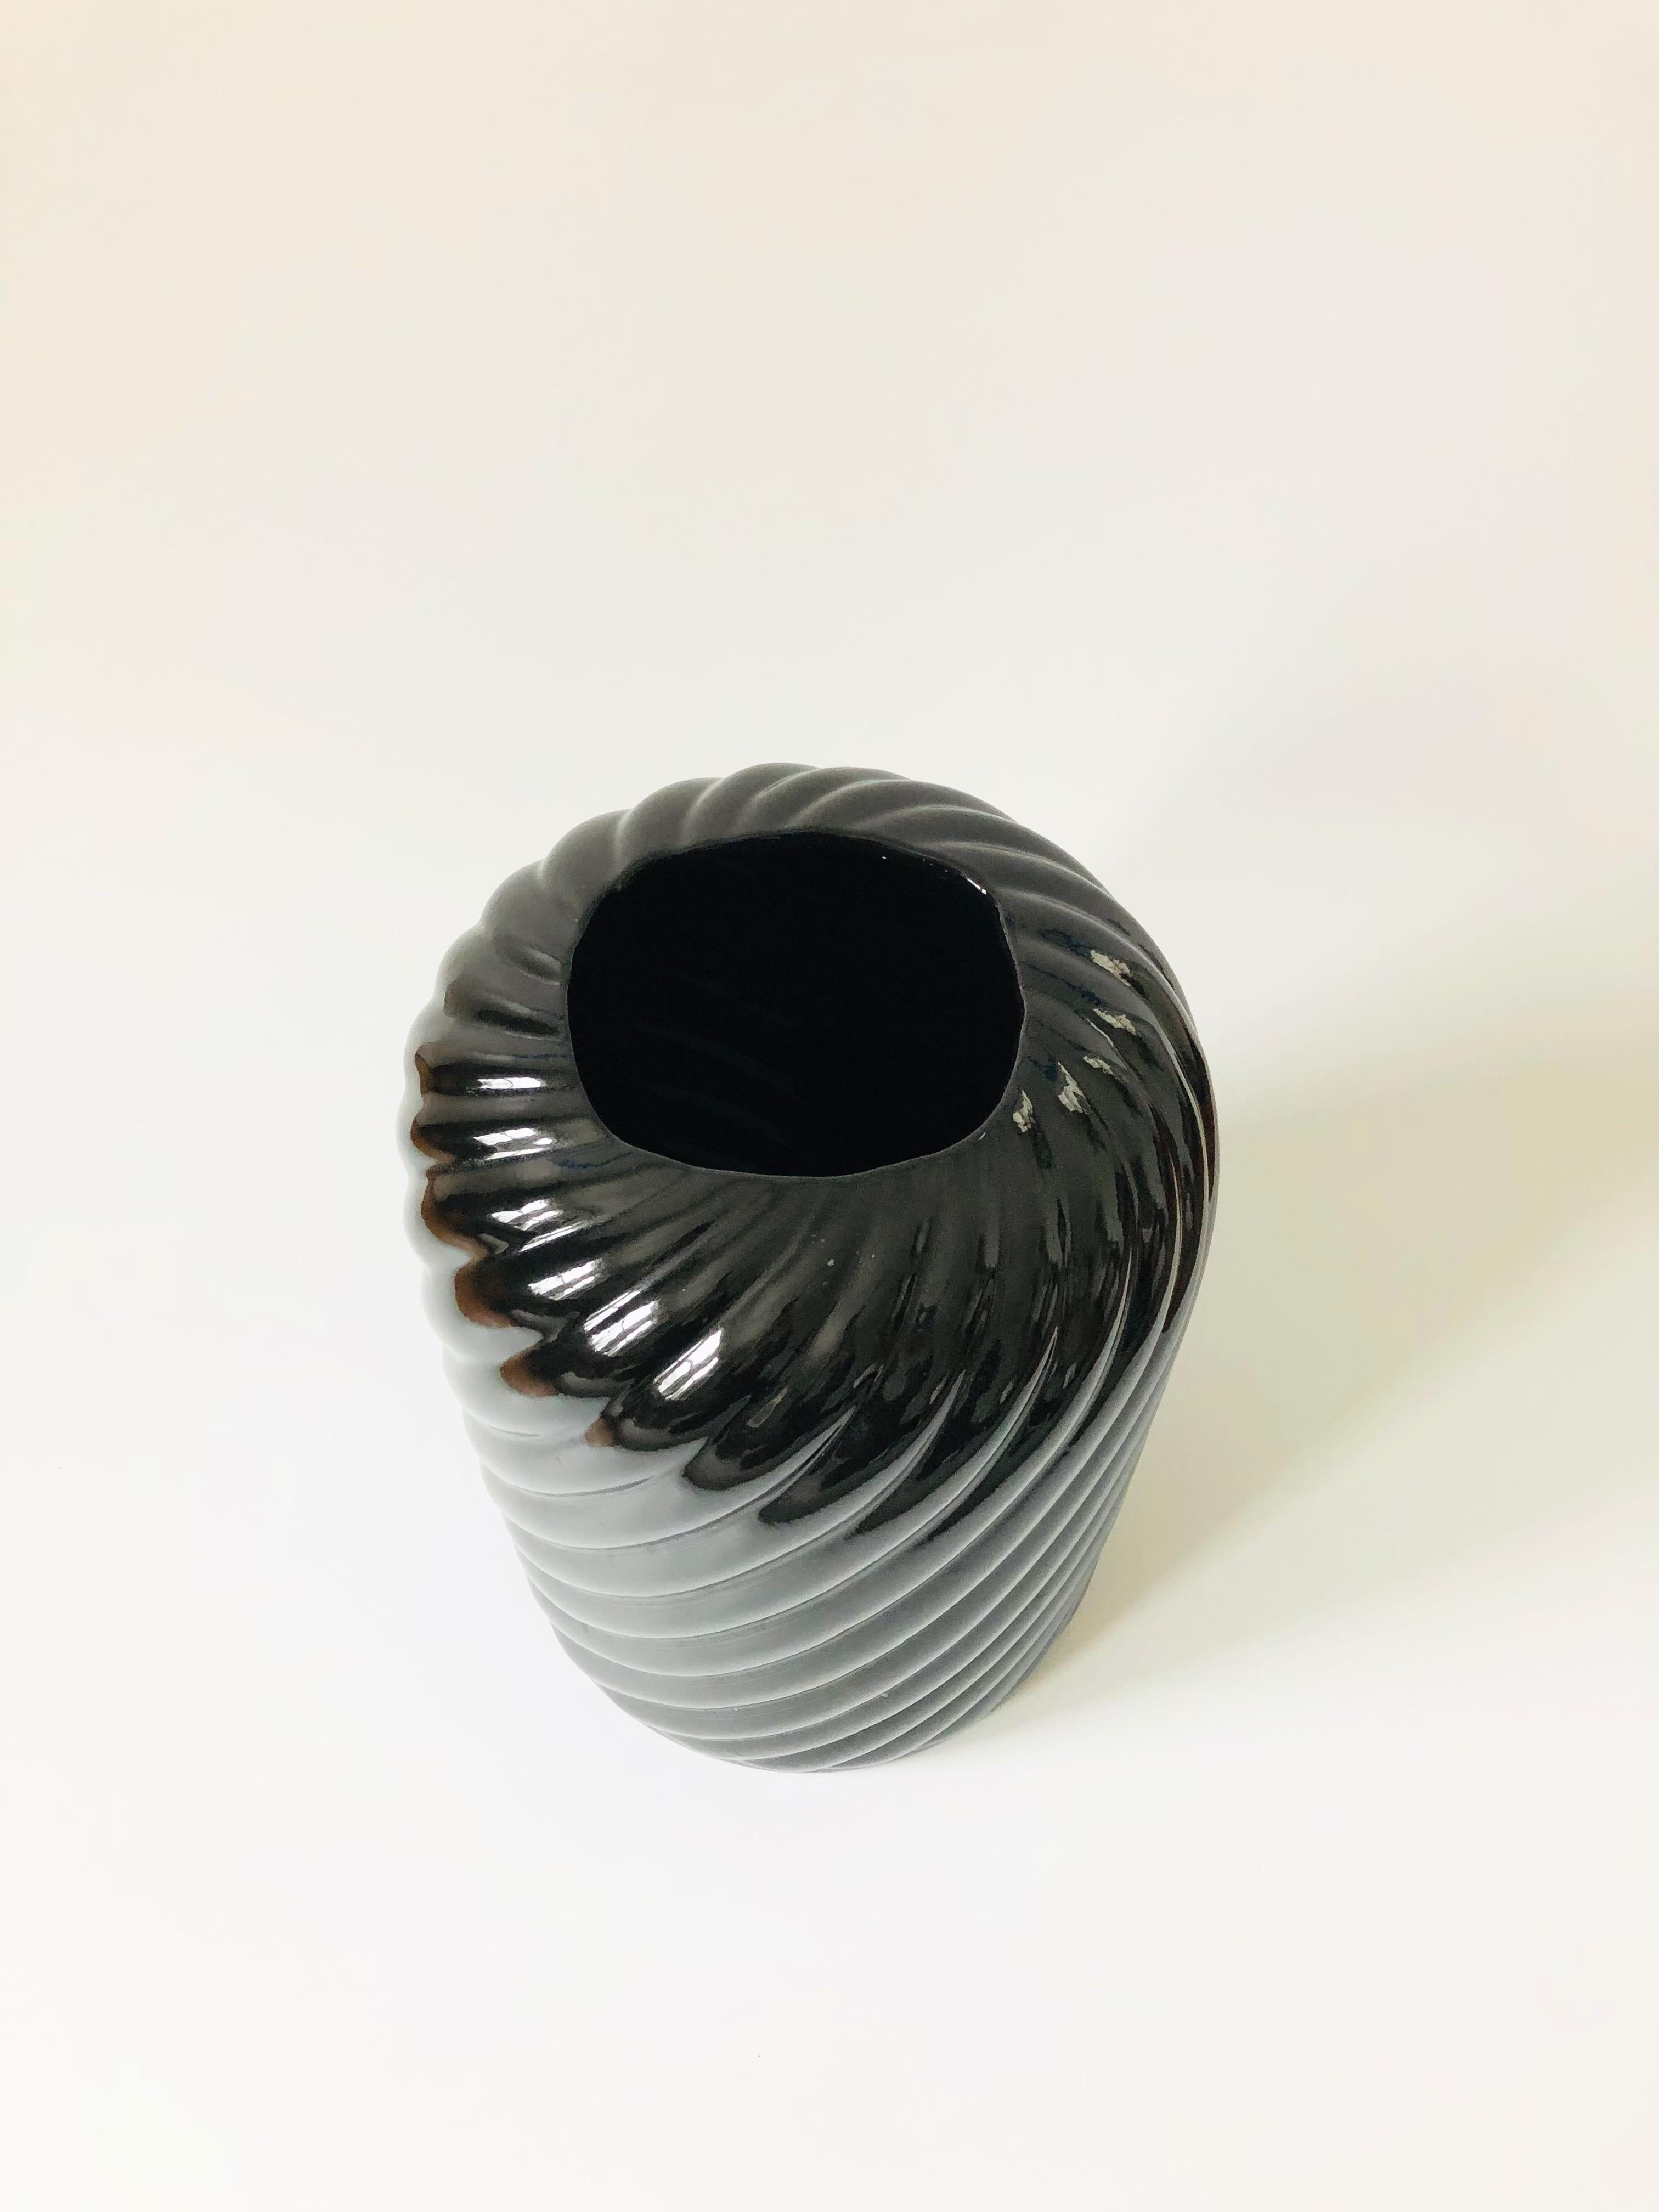 An extra large vintage 80s modern ceramic vase. Nice cylinder shape with an embossed swirl design around the sides, finished in a glossy black glaze. A sculptural bold statement piece, perfect for using as a floor vase as well.
   